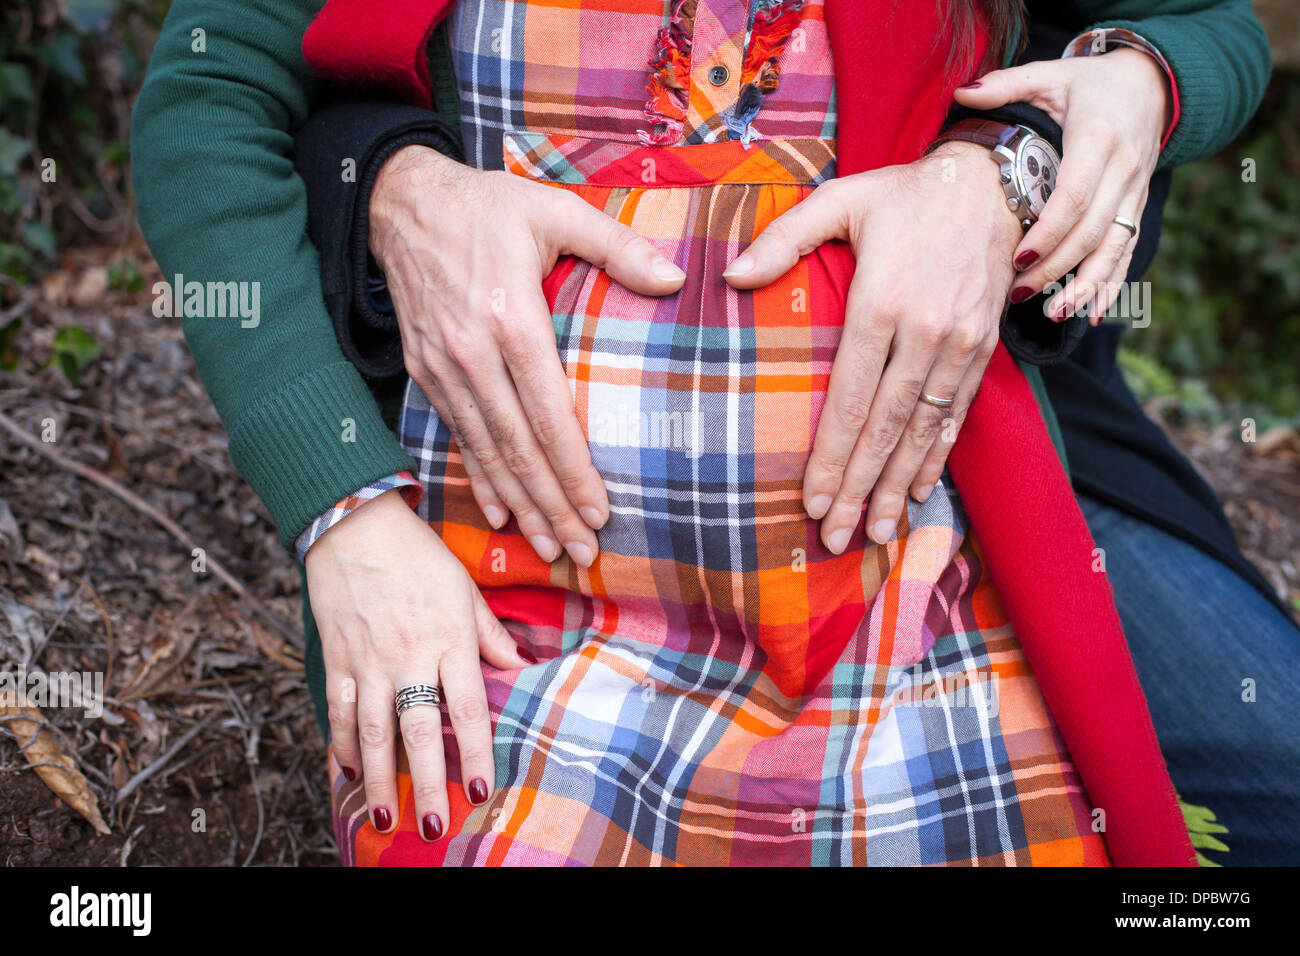 Hands of mother and father on baby belly forming a heart. Stock Photo